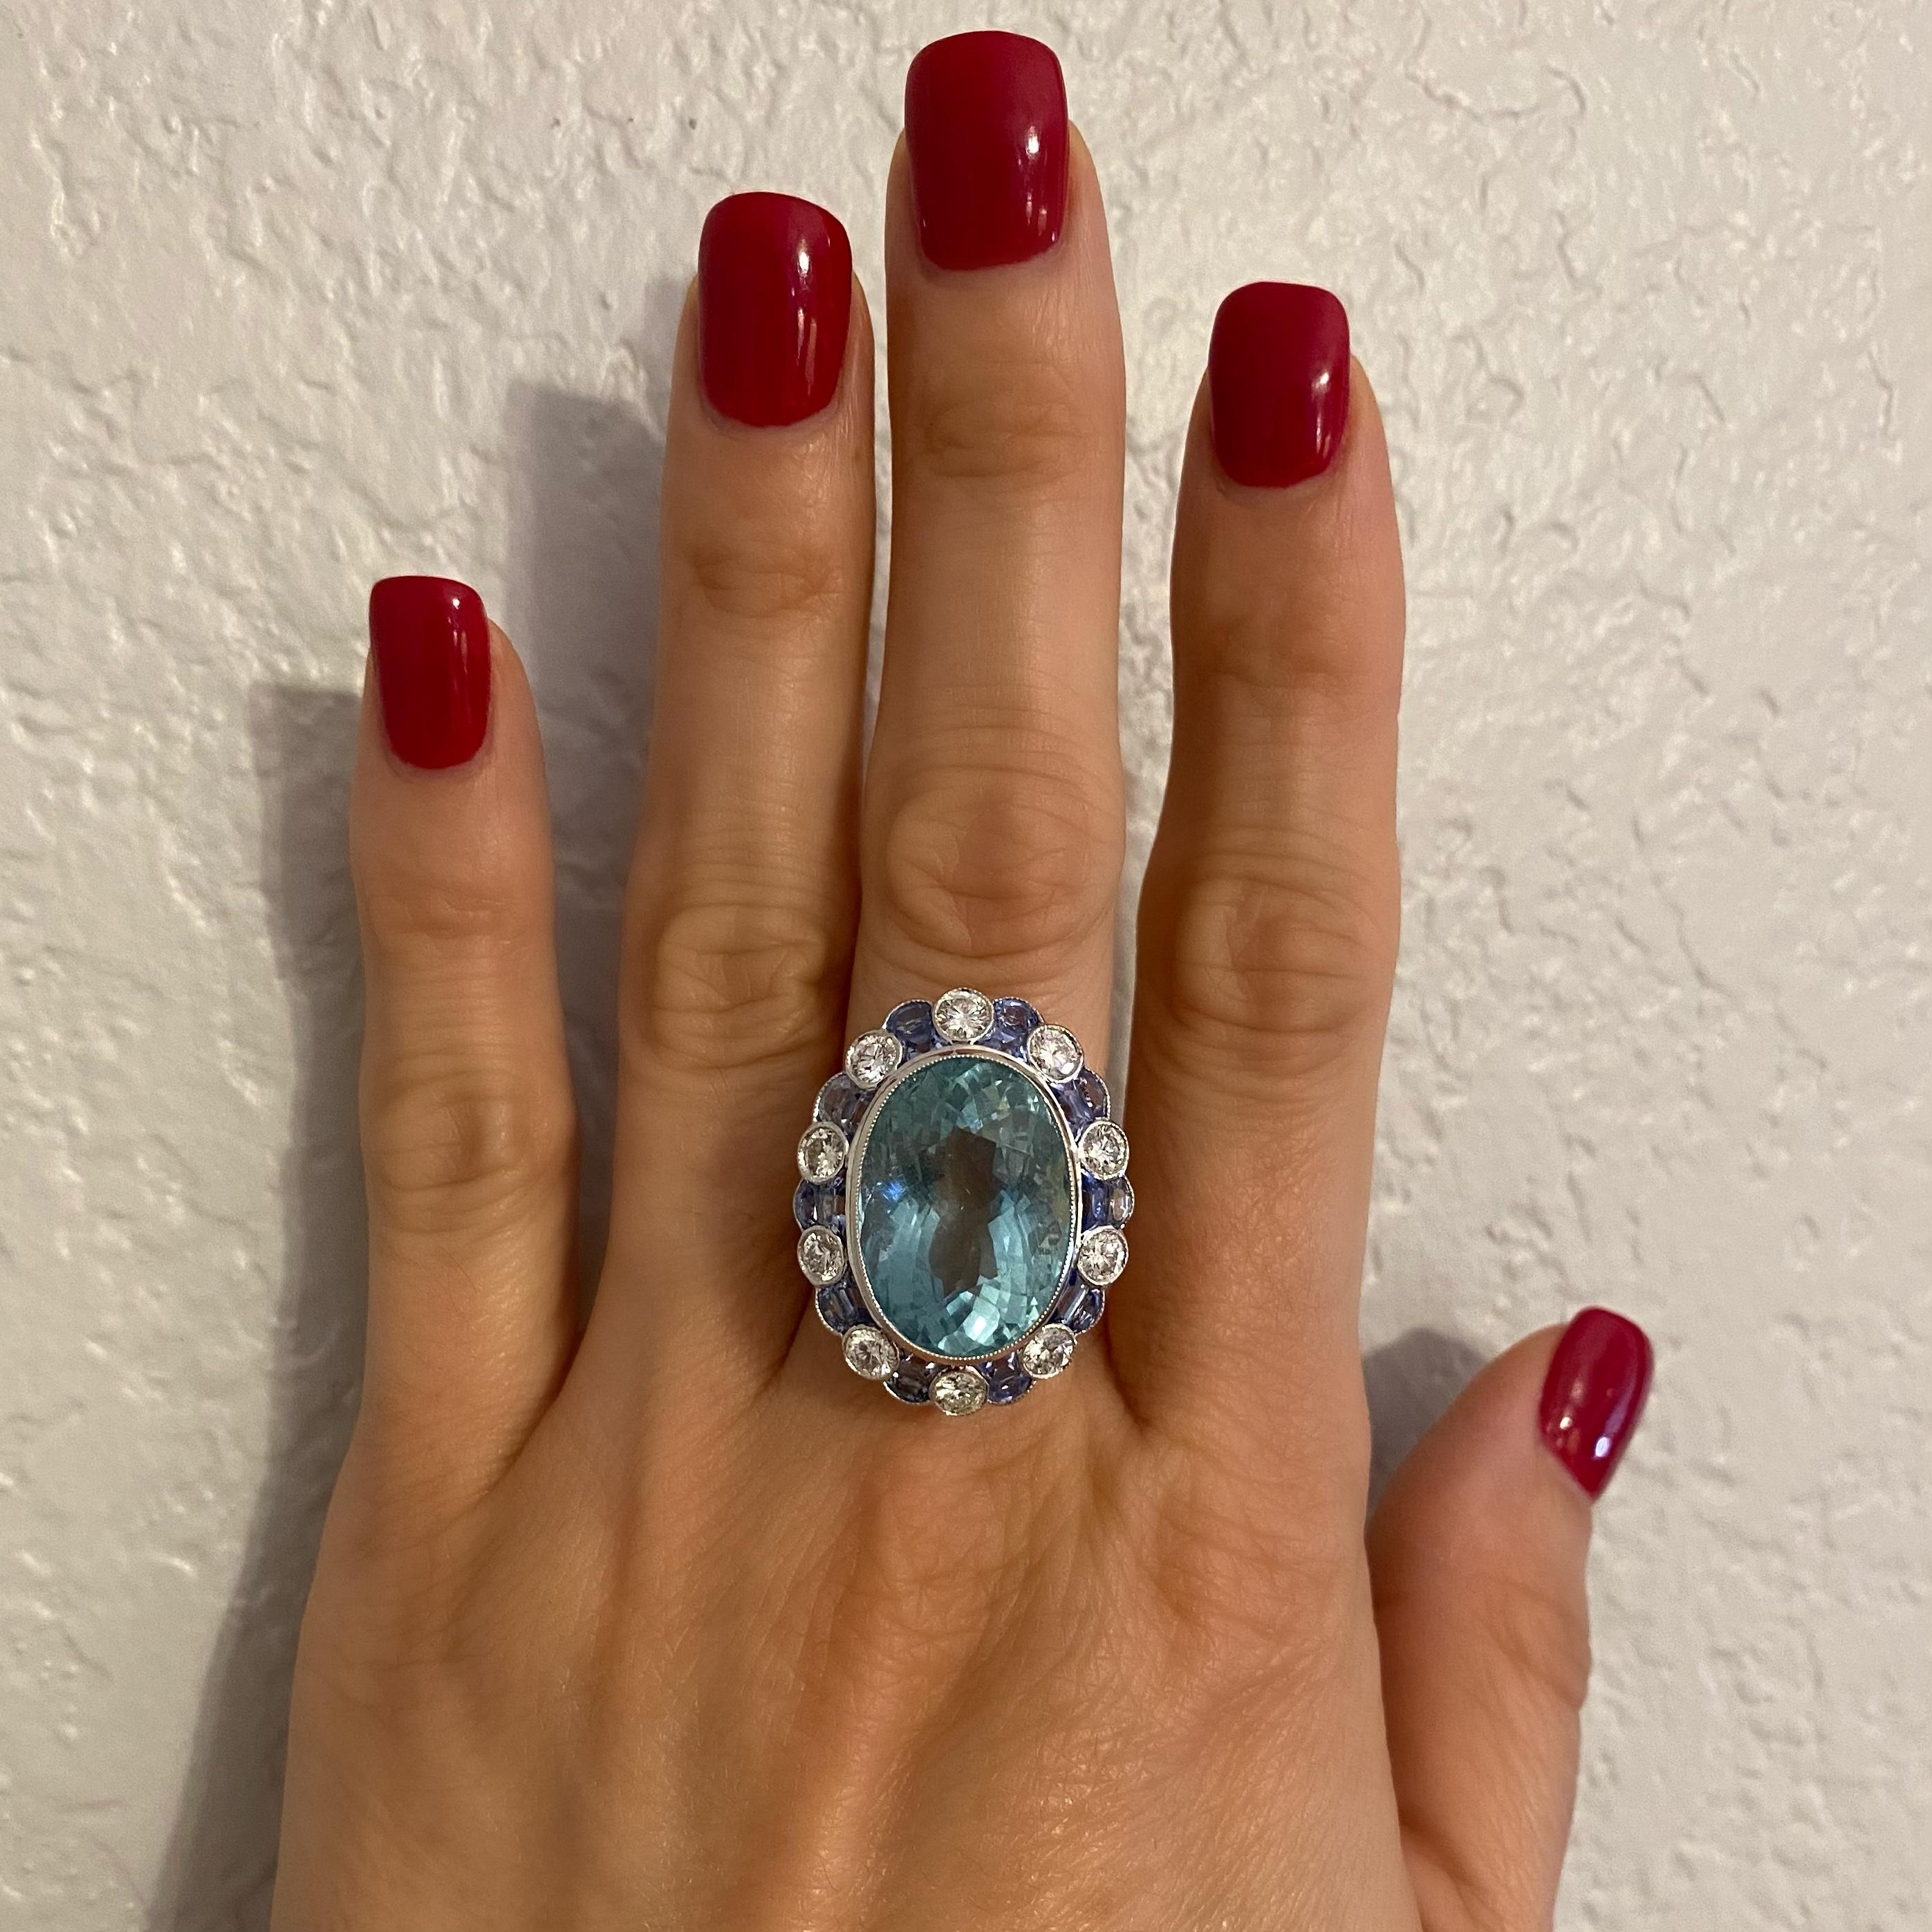 Beautiful and finely detailed Platinum Art Deco Style Ring, center Hand set with a securely nestled 16.50 Carat oval Aquamarine Gemstone surrounded by 20 custom cut blue Sapphires, approx. 3.00tcw and 16 round Brilliant cut Diamonds, approx.